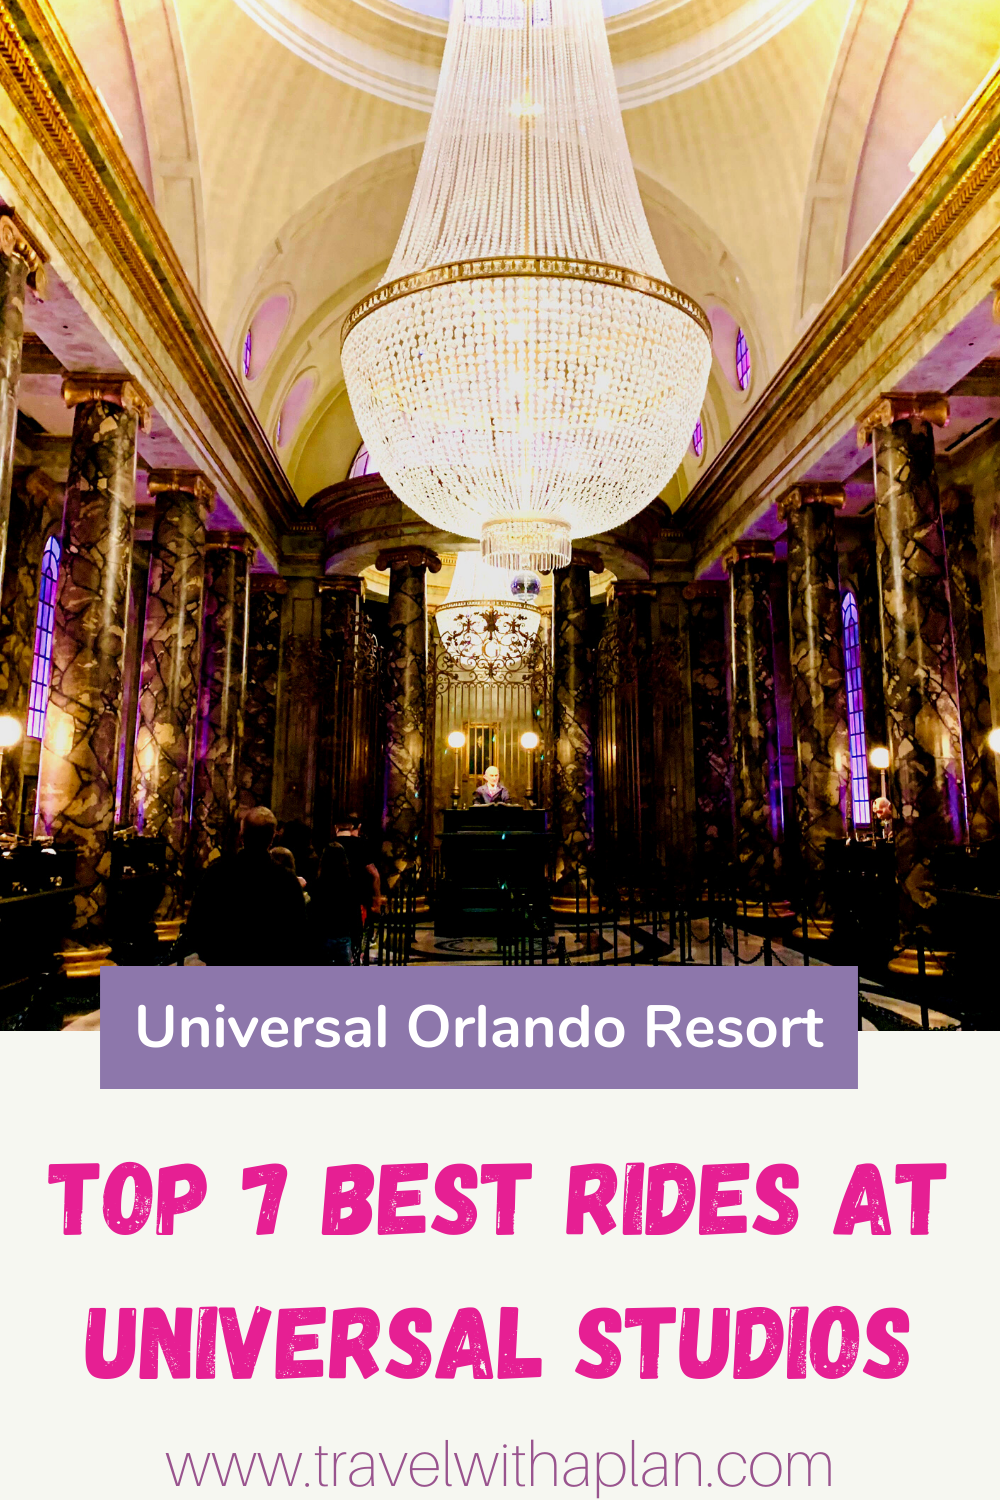 Find out the absolute best rides at Universal Studios Orlando from top US family travel blog, Travel With A Plan! #UniversalOrlandoResort #UniversalStudios #bestthemeparks #Floridatravel